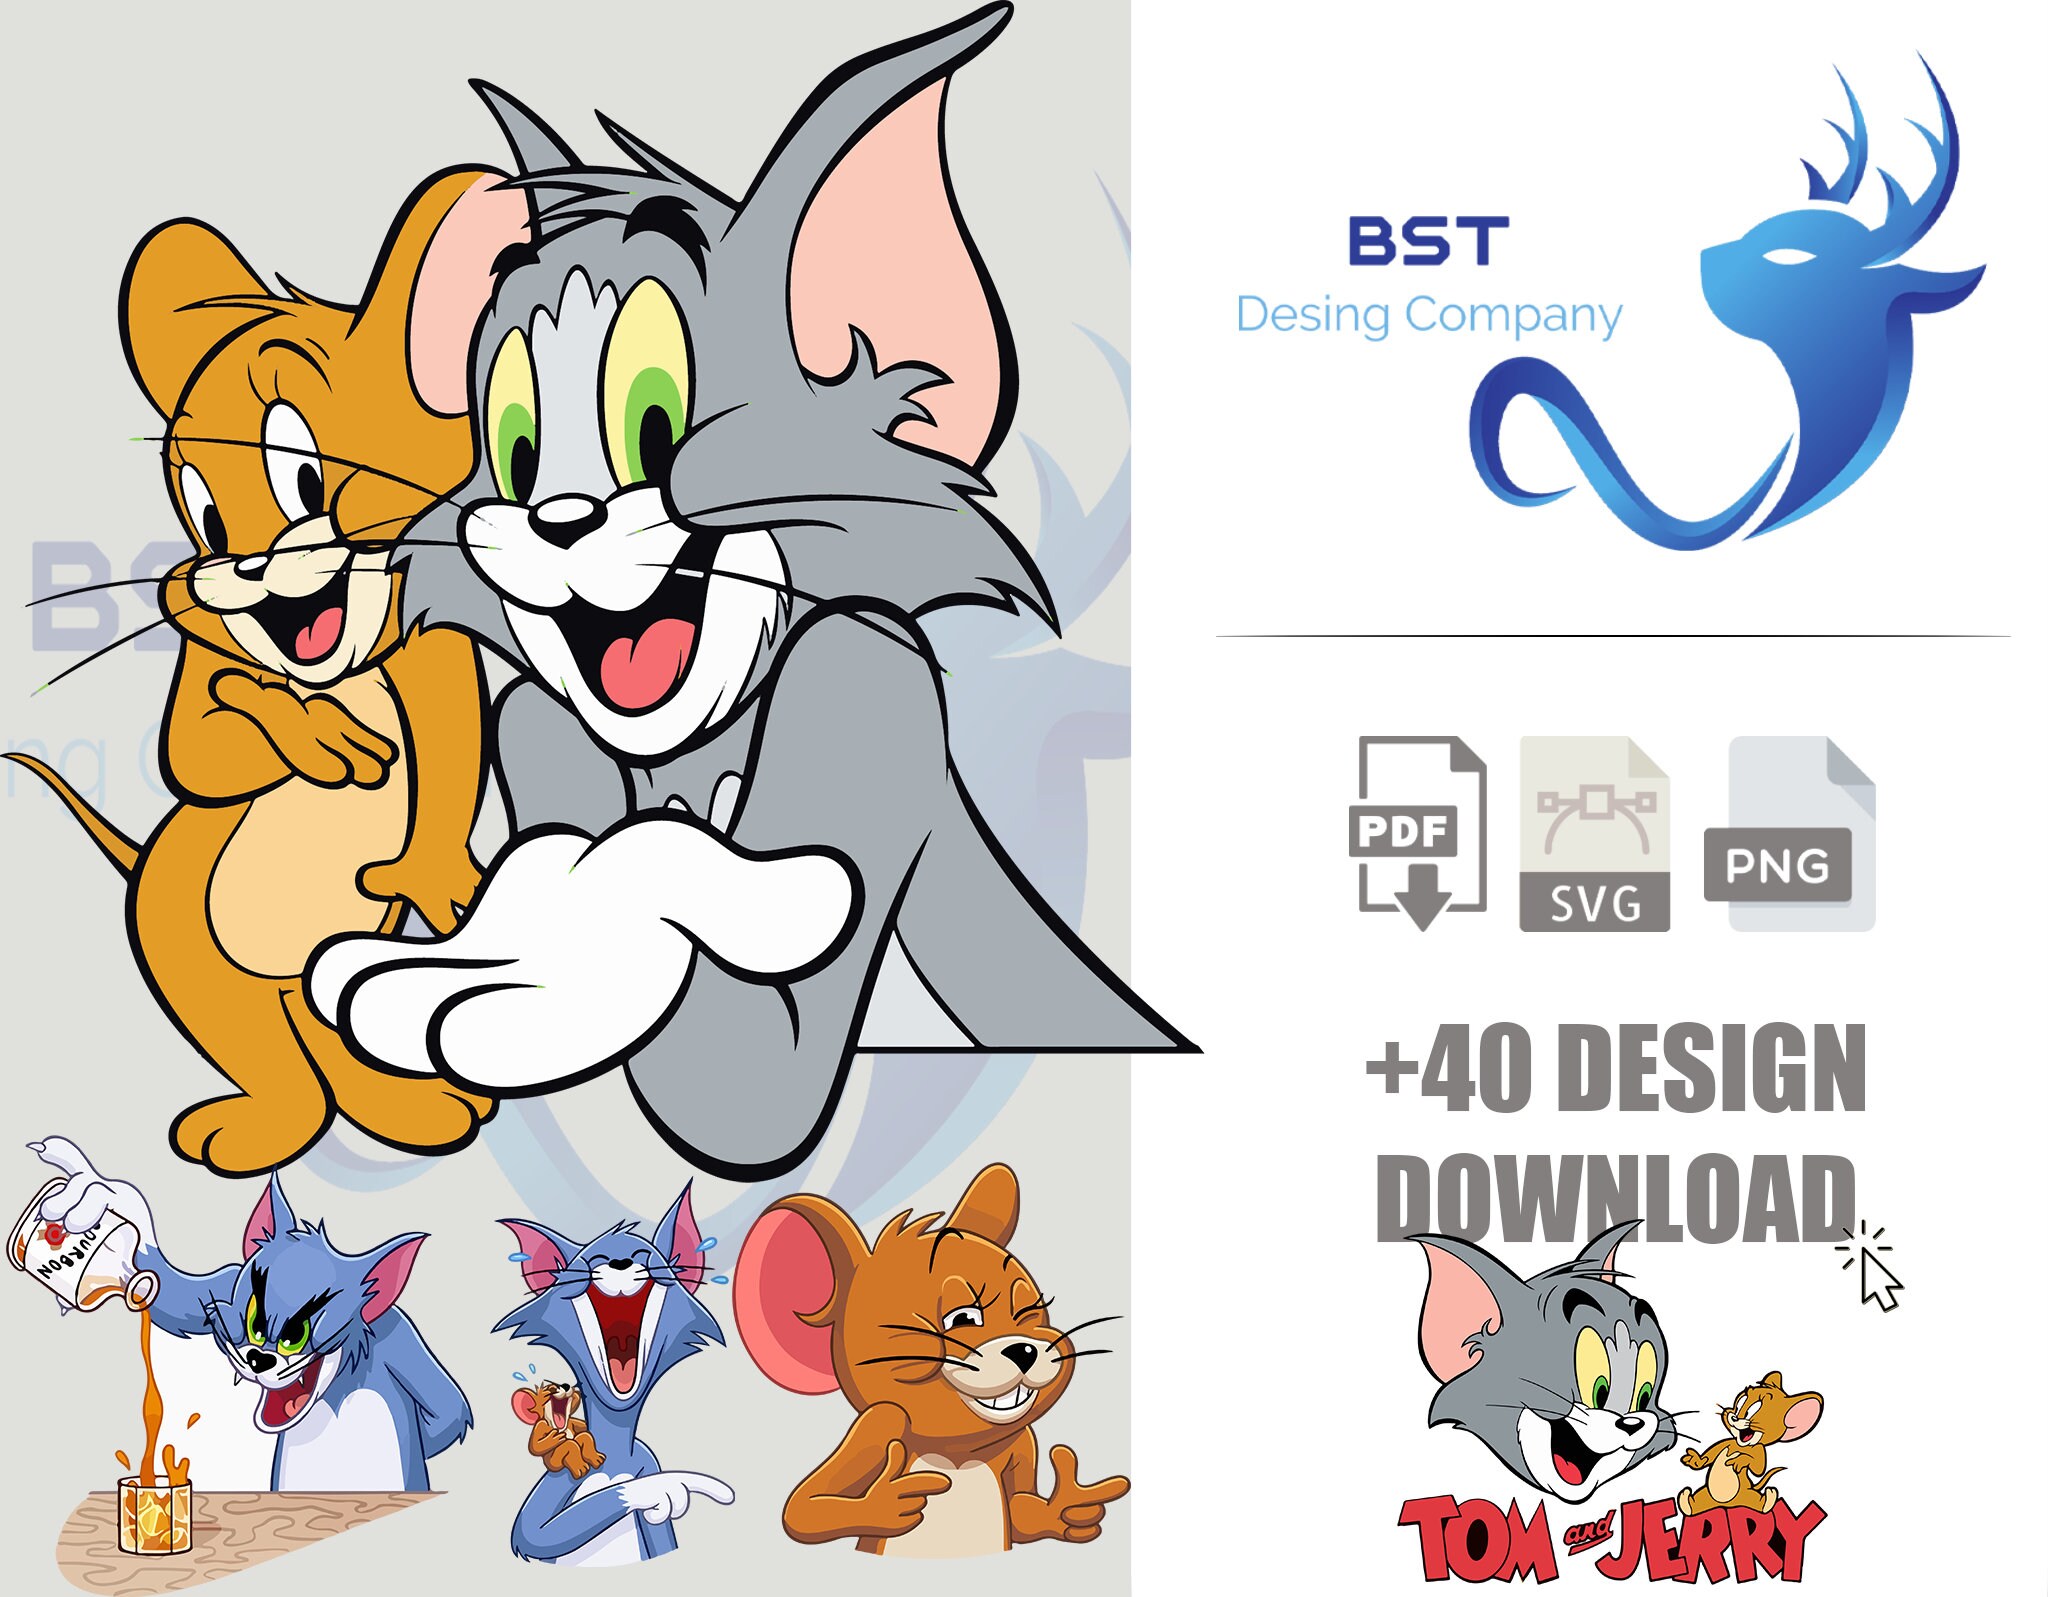 Tom Jerry Images - Etsy